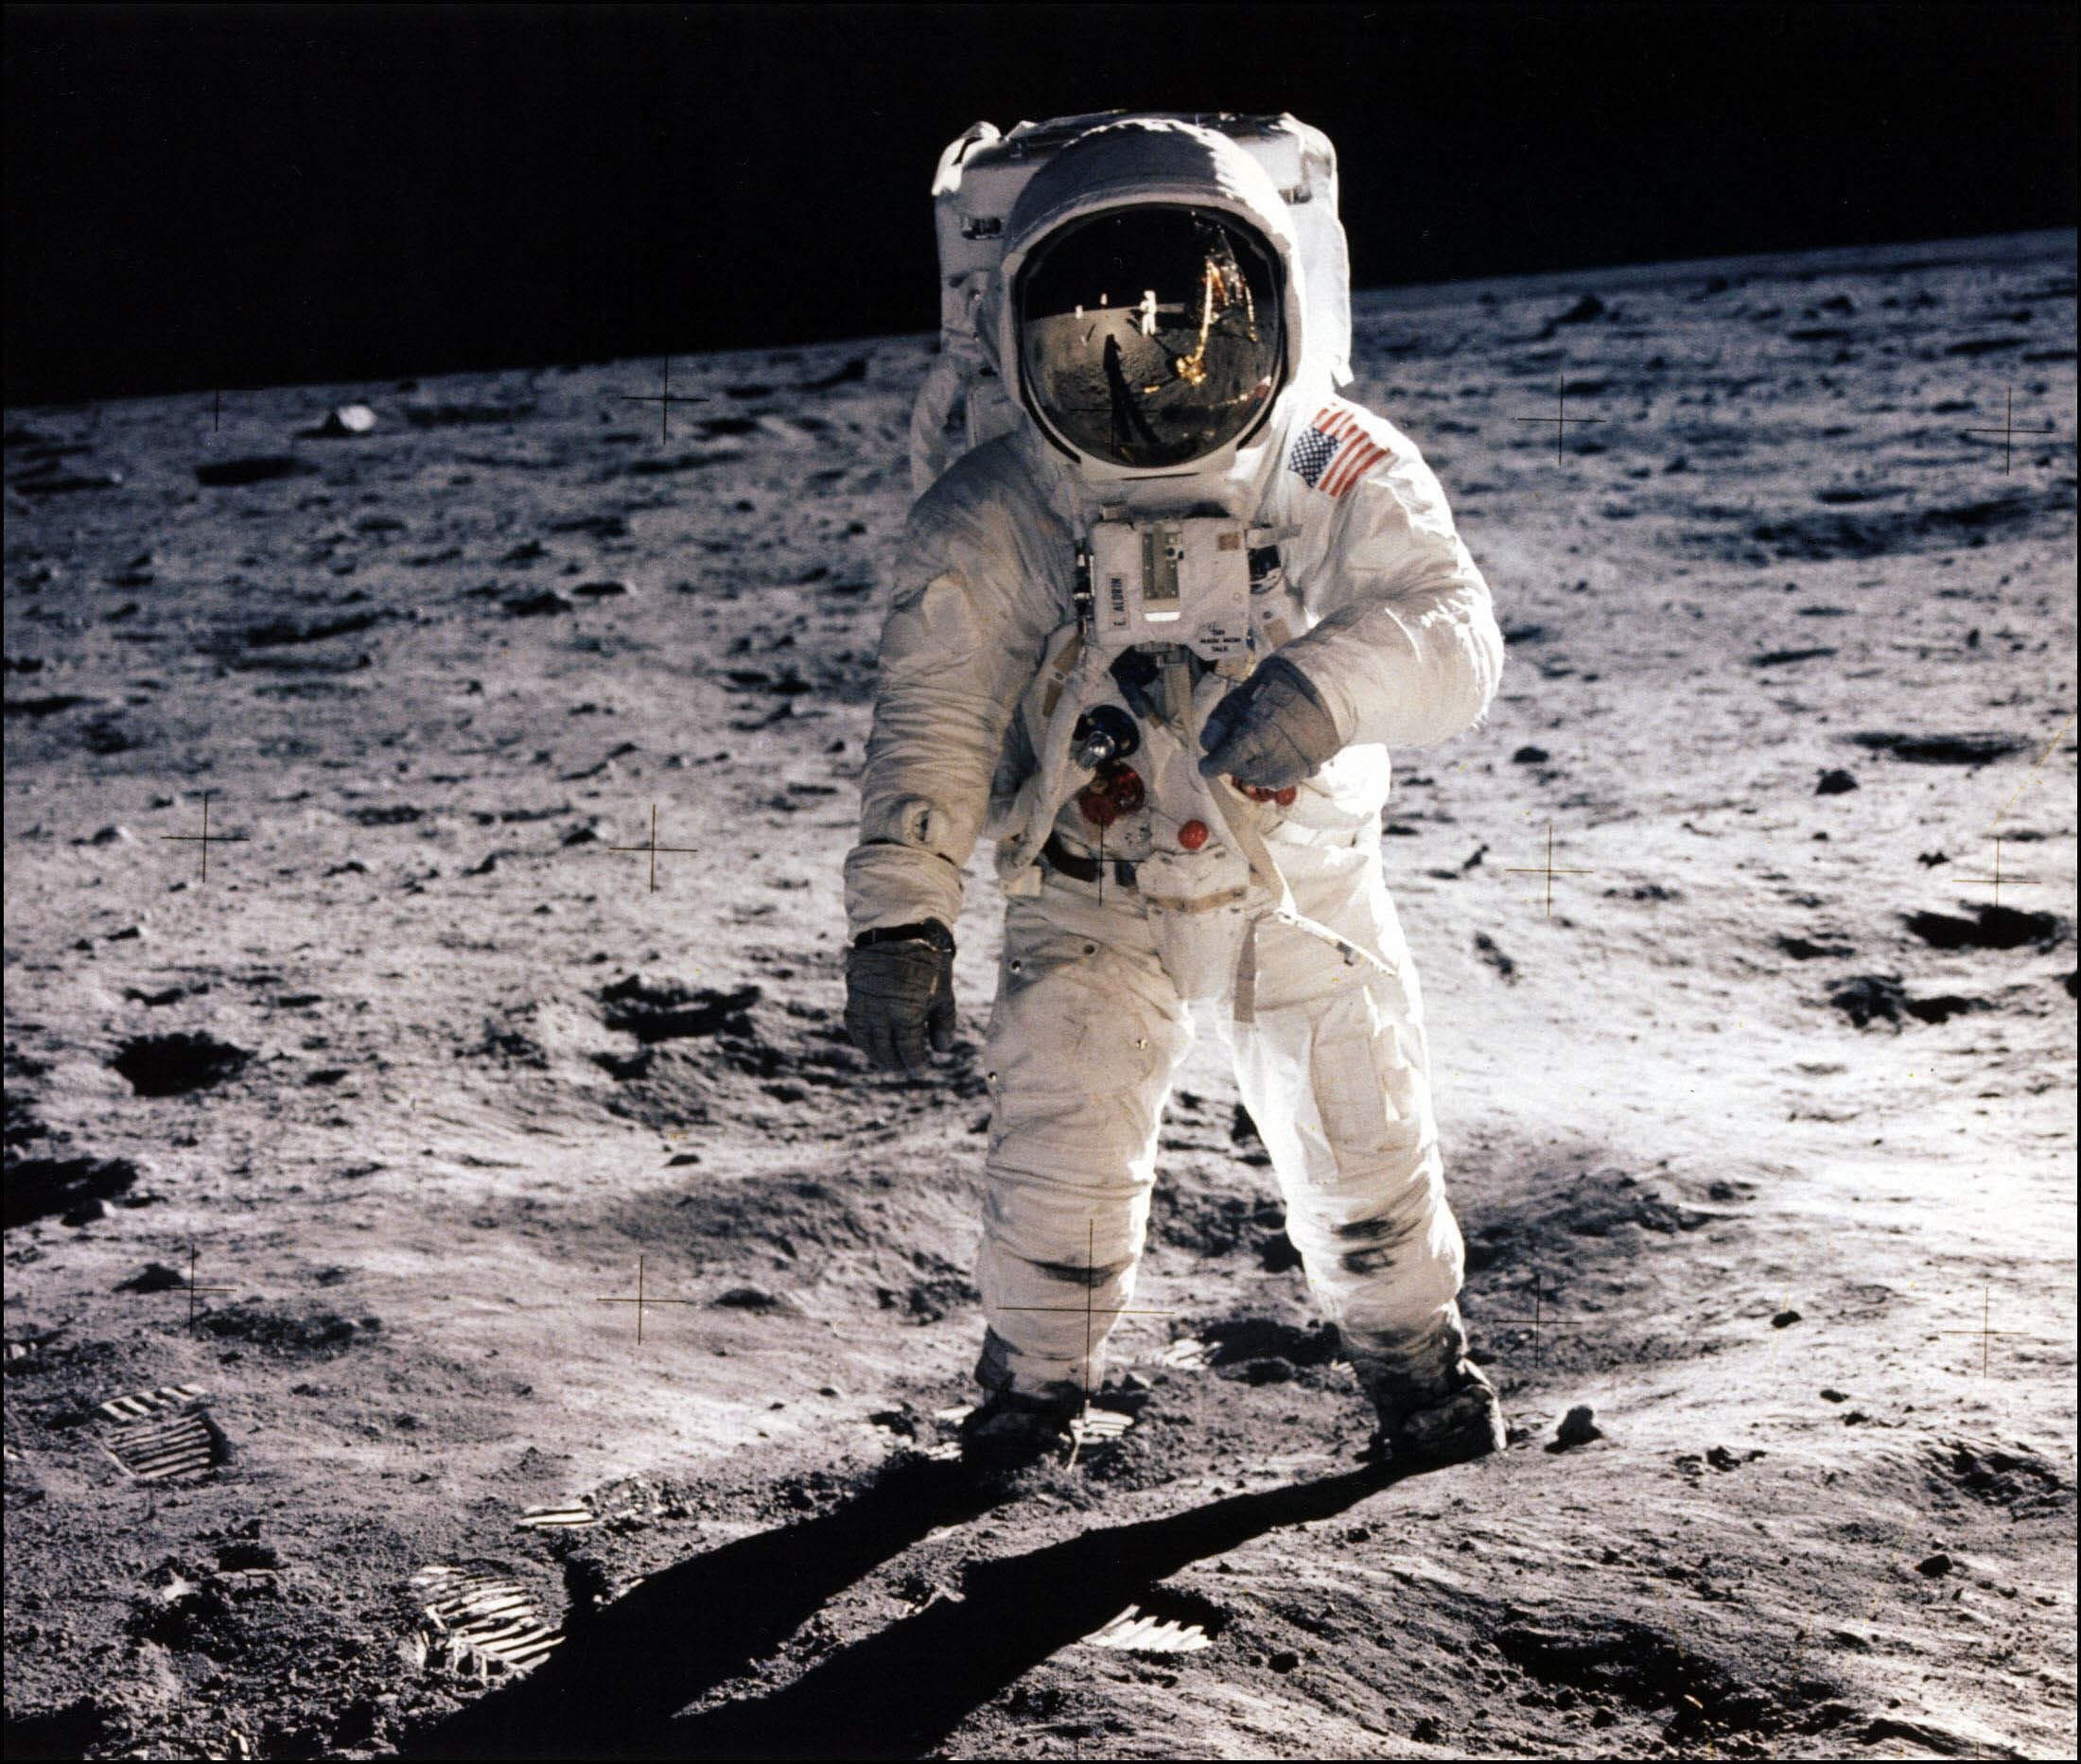 Why is it so difficult to land on the Moon if it was done 50 years ago?